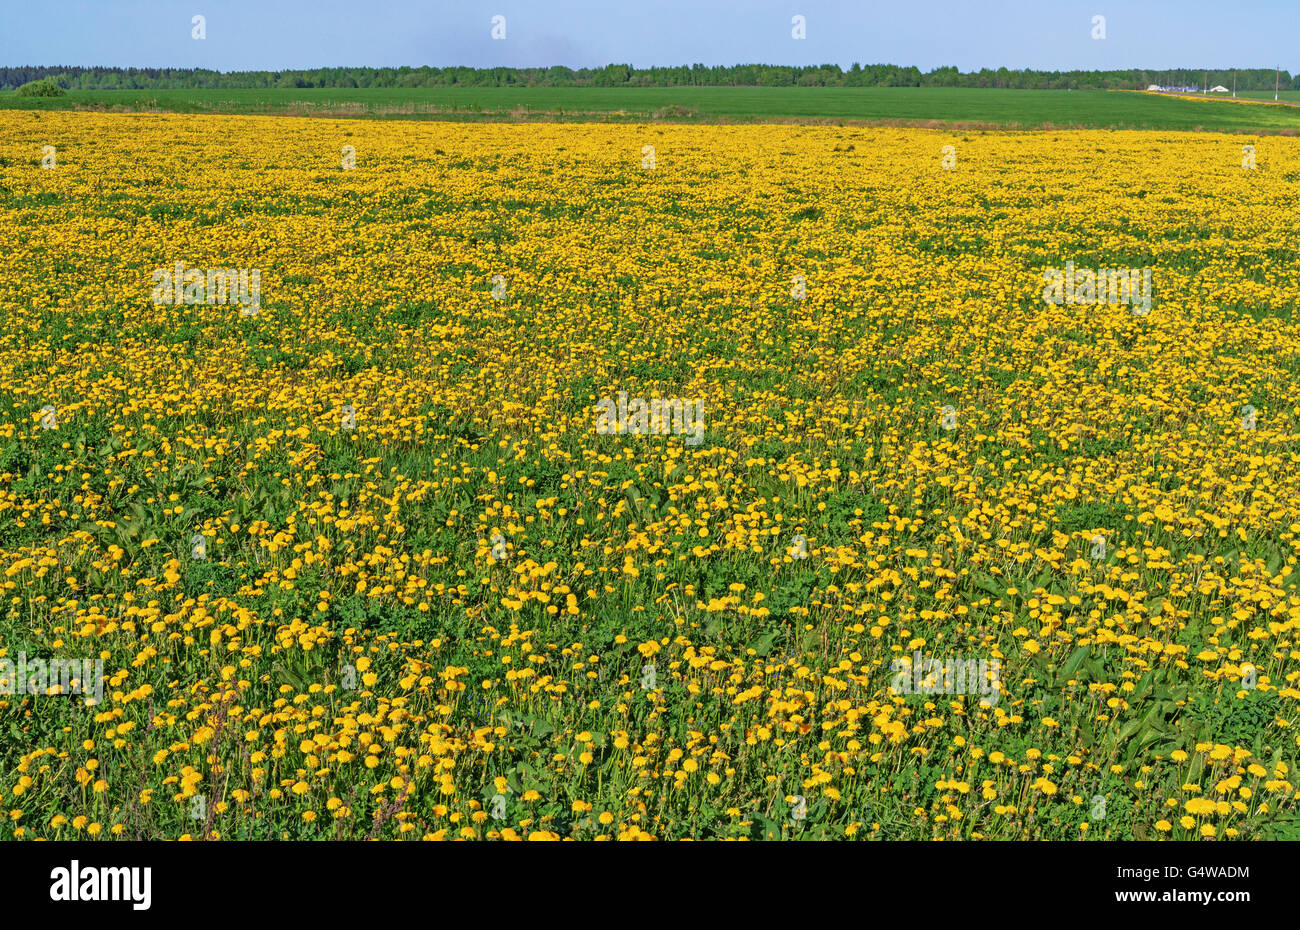 Near the road grow yellow dandelions.In the distance a green wheat field. Stock Photo